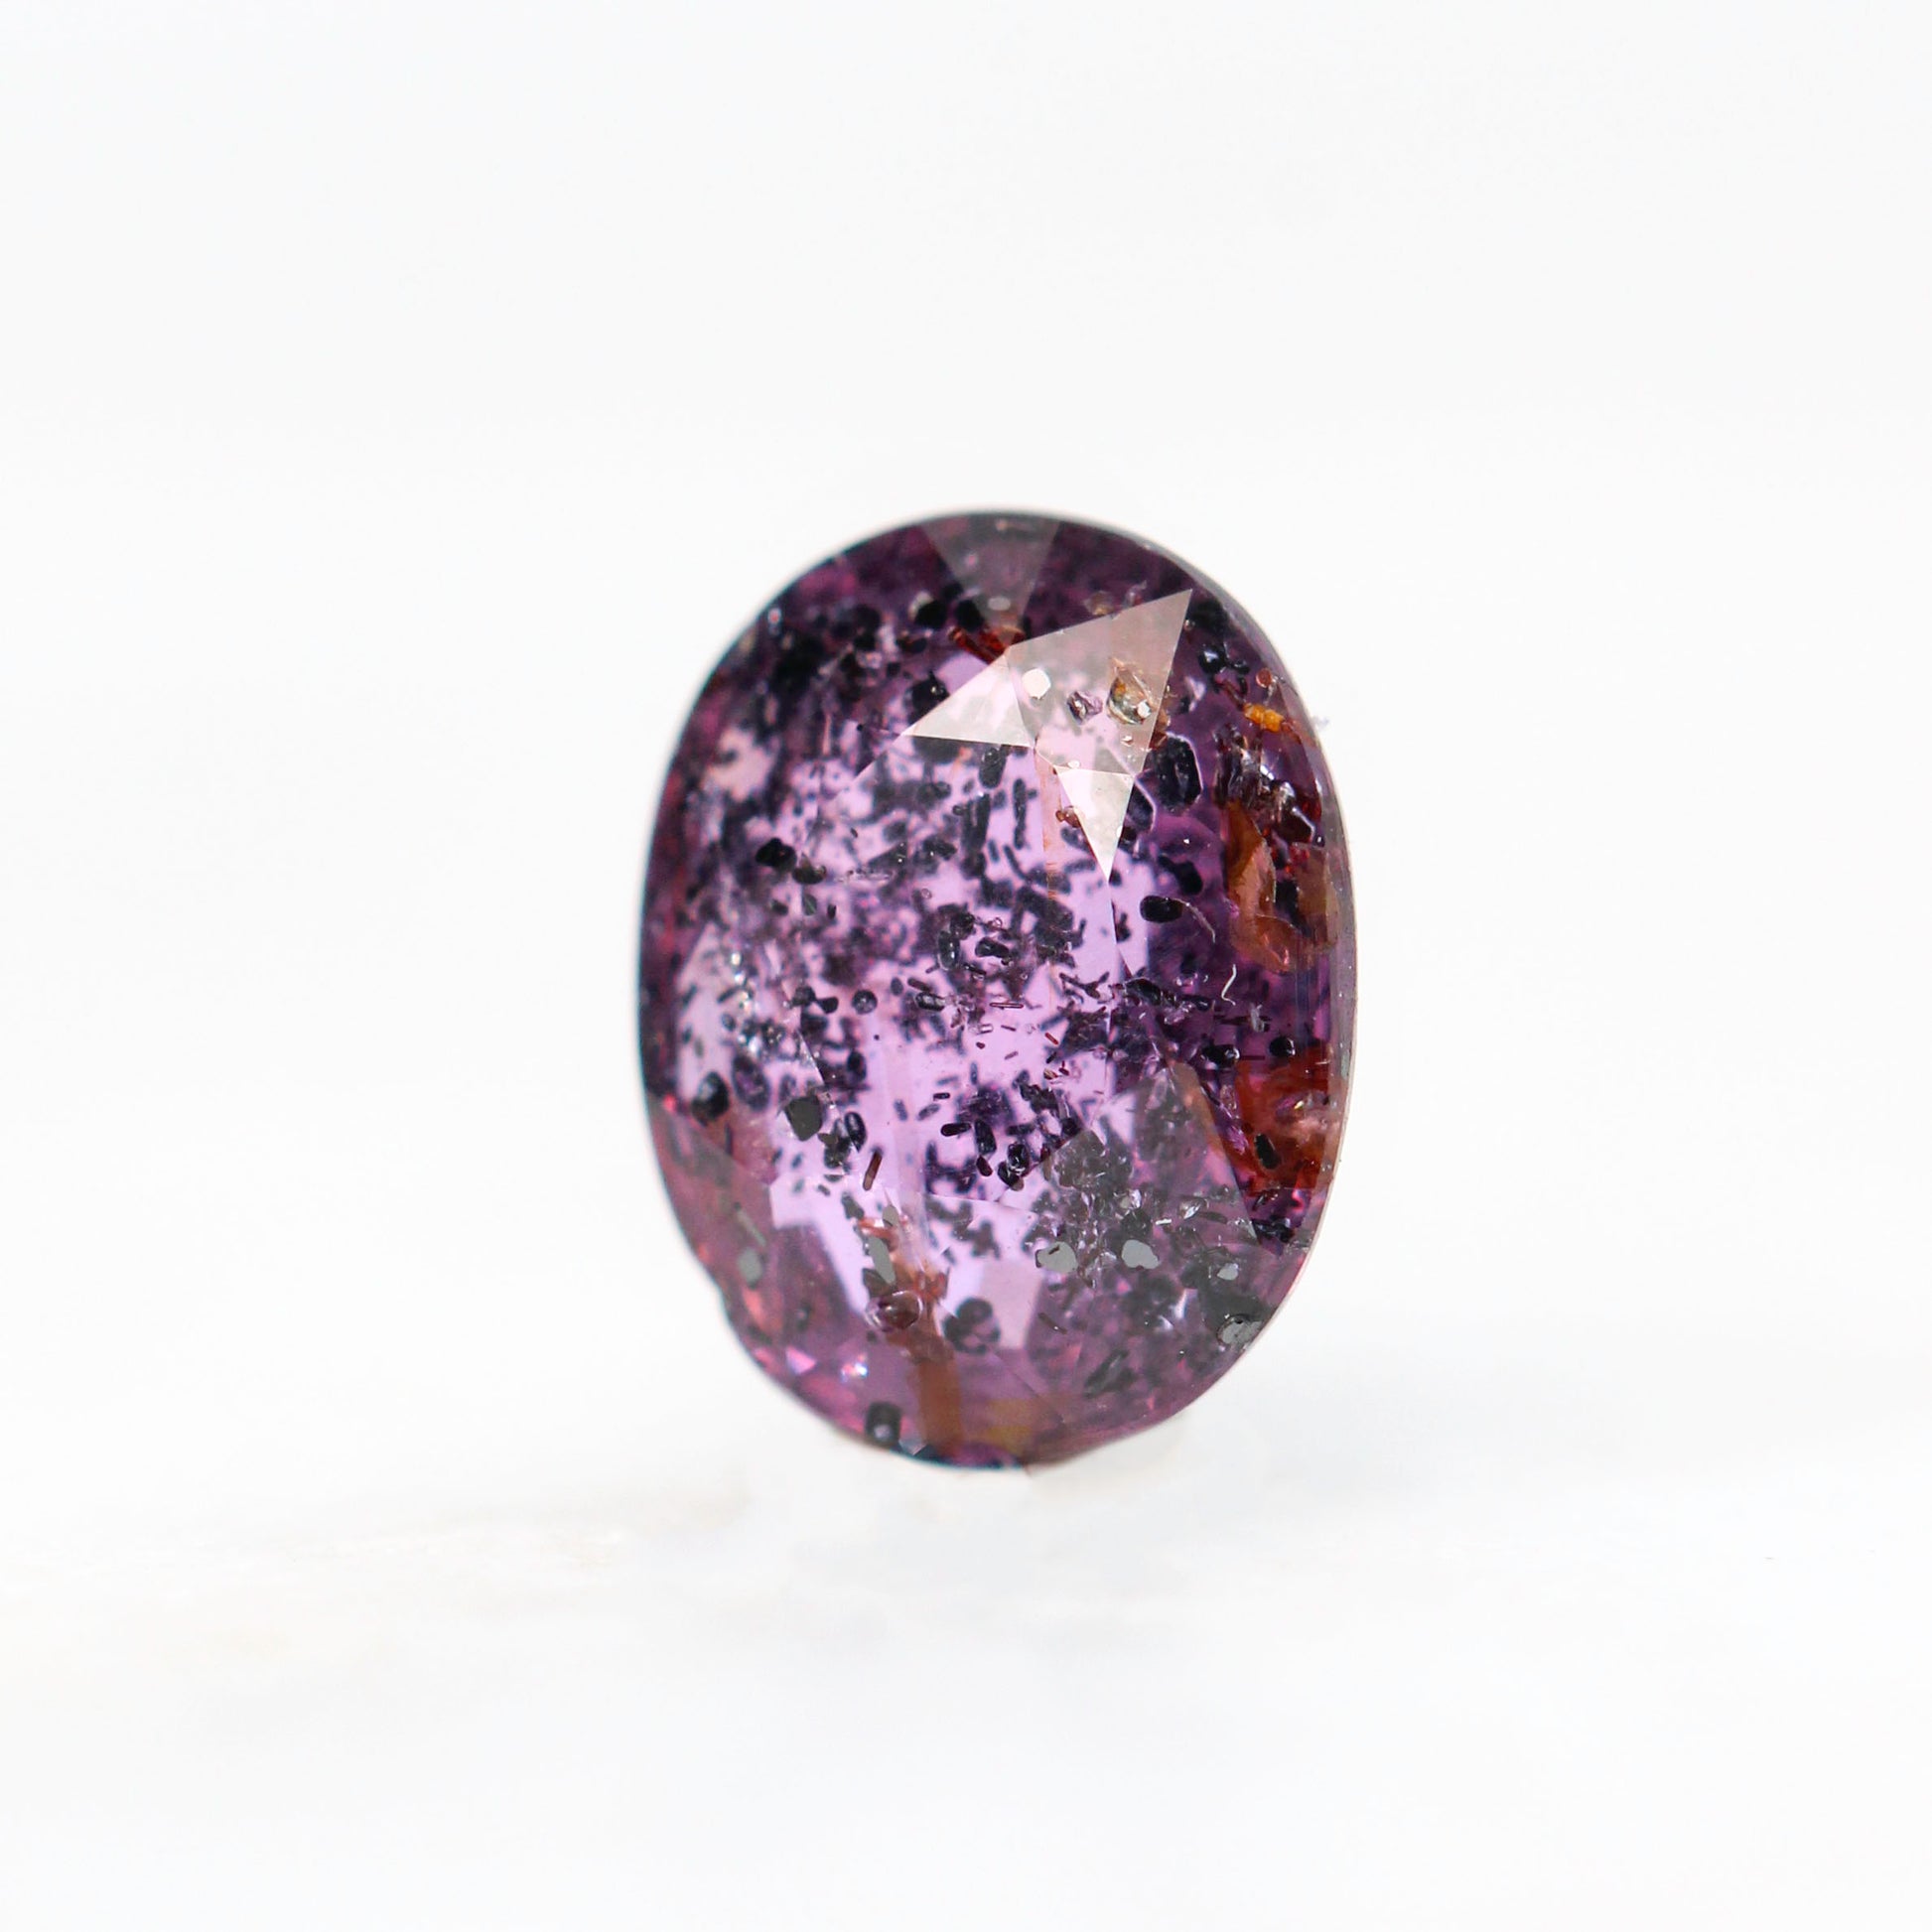 0.84 Carat Purple-Red Oval Ruby for Custom Work - Inventory Code PROR084 - Midwinter Co. Alternative Bridal Rings and Modern Fine Jewelry